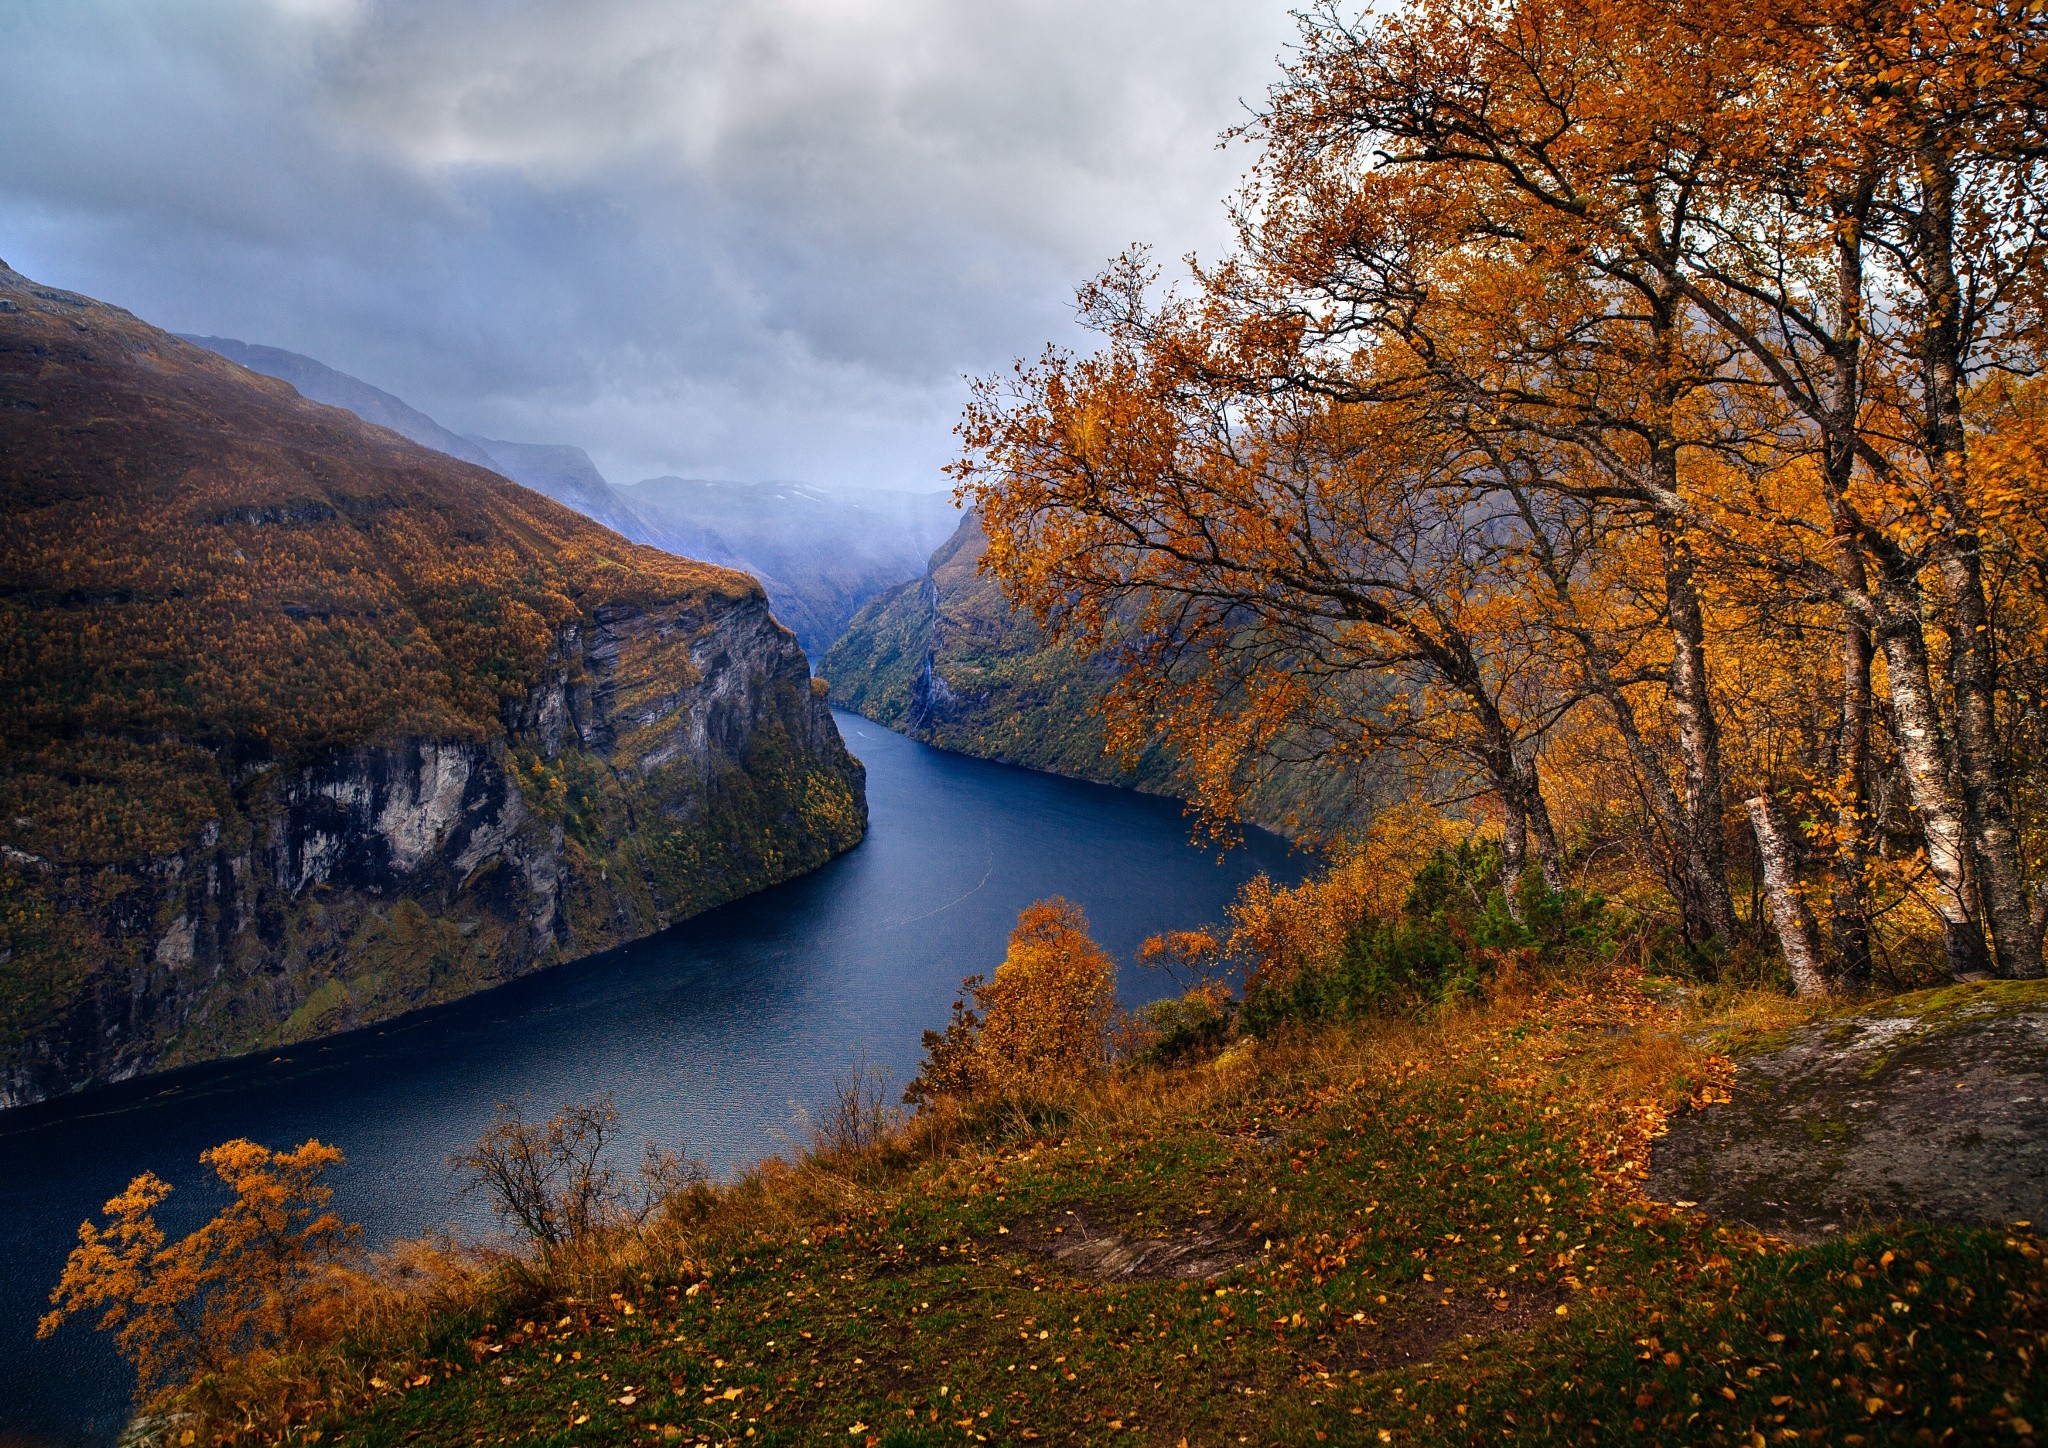 General 2048x1448 nature landscape fjord Norway fall trees grass mountains clouds Geiranger outdoors Geirangerfjord